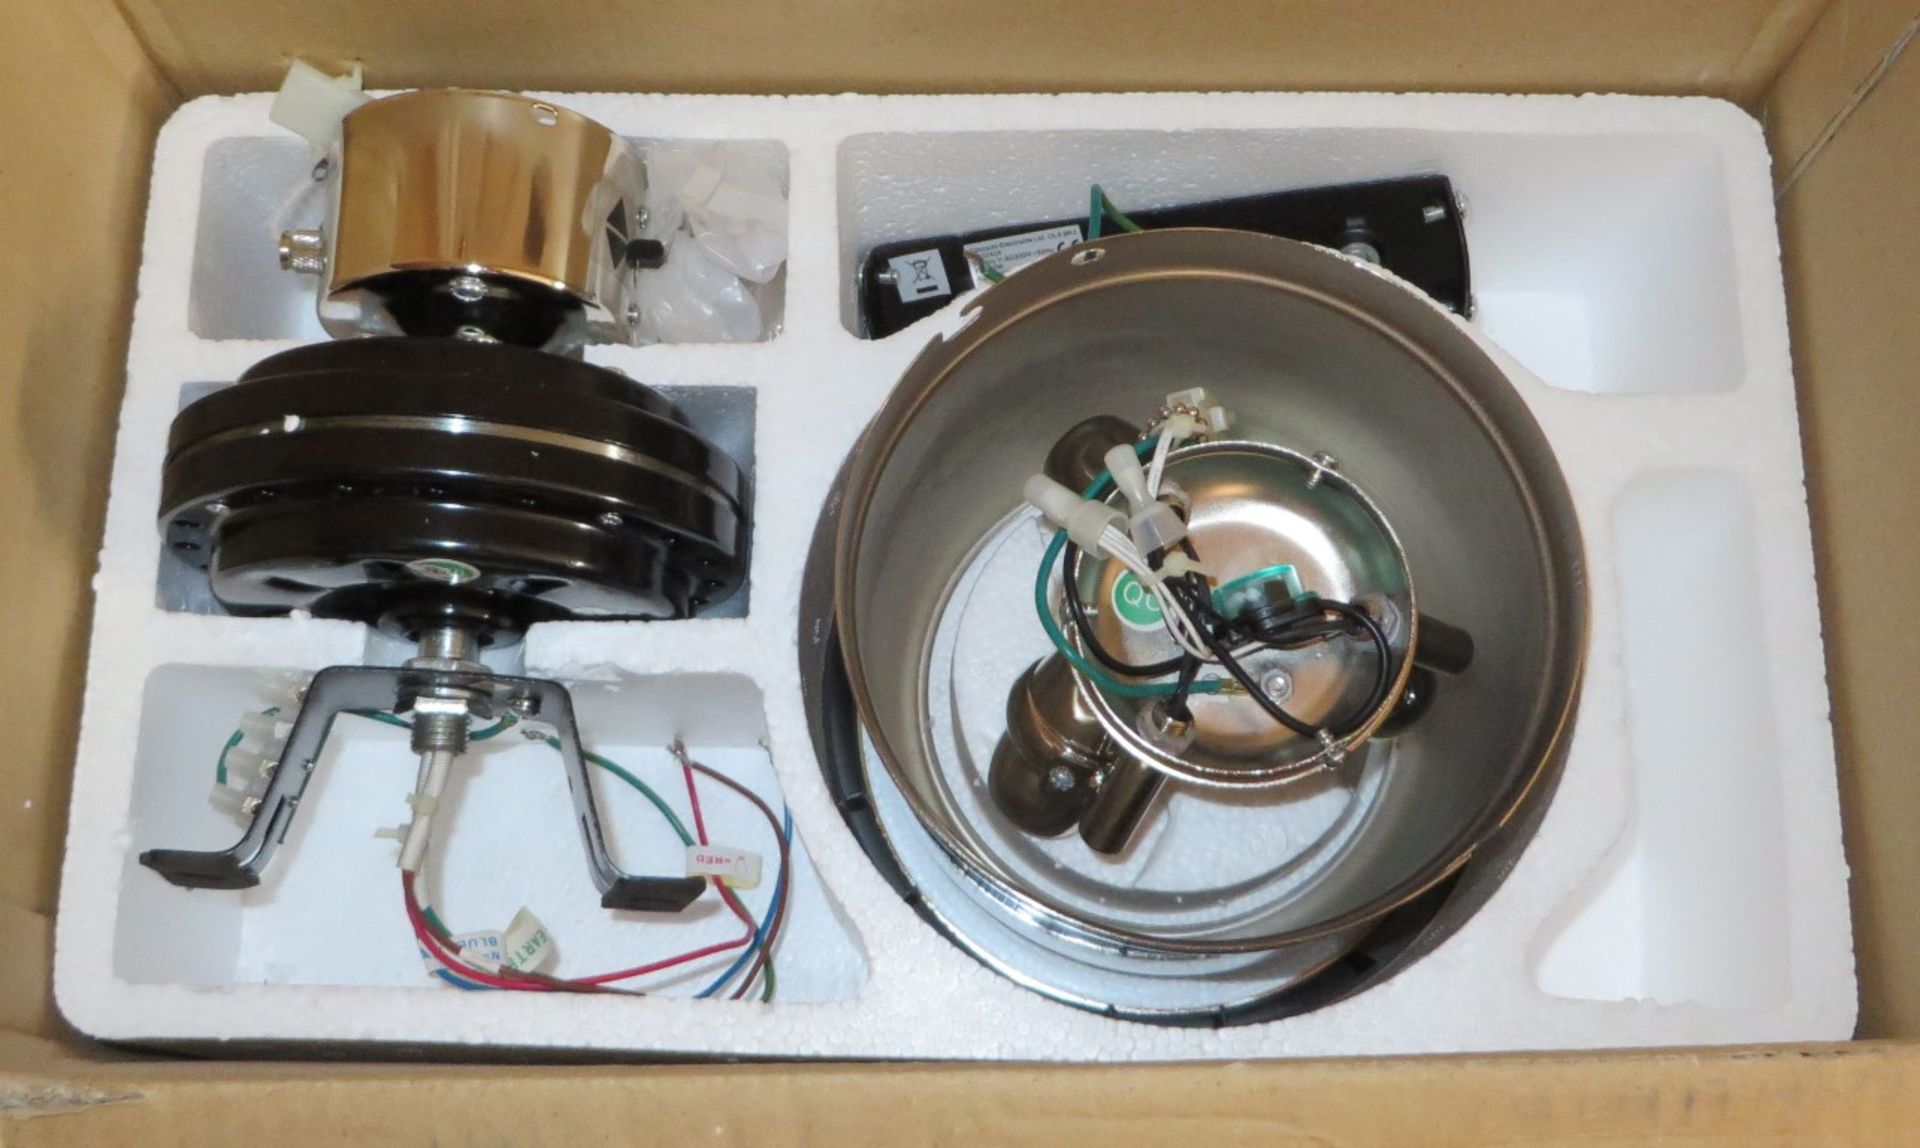 1 x Cyclone Ceiling Fan With Triple Halogen Light Kit - 106cm/42" - Unsued, In Original Box - Ref: - Image 5 of 5